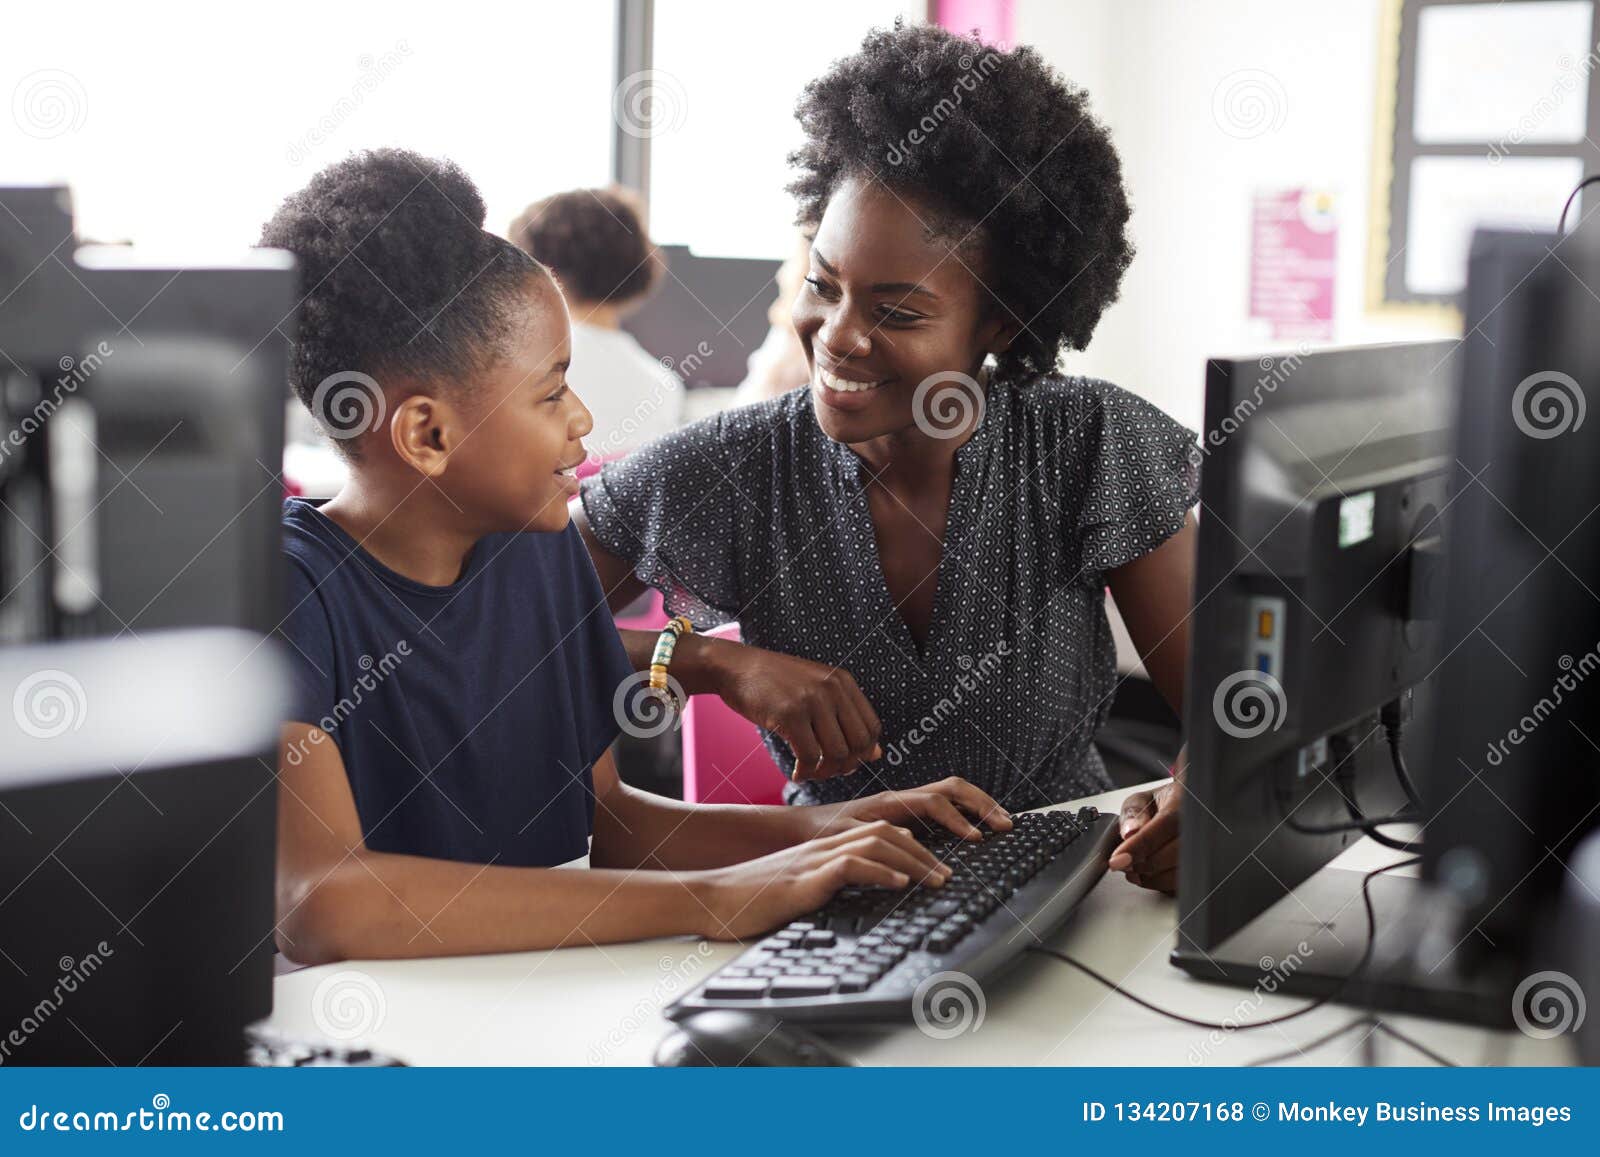 teacher helping female high school student working at screen in computer class